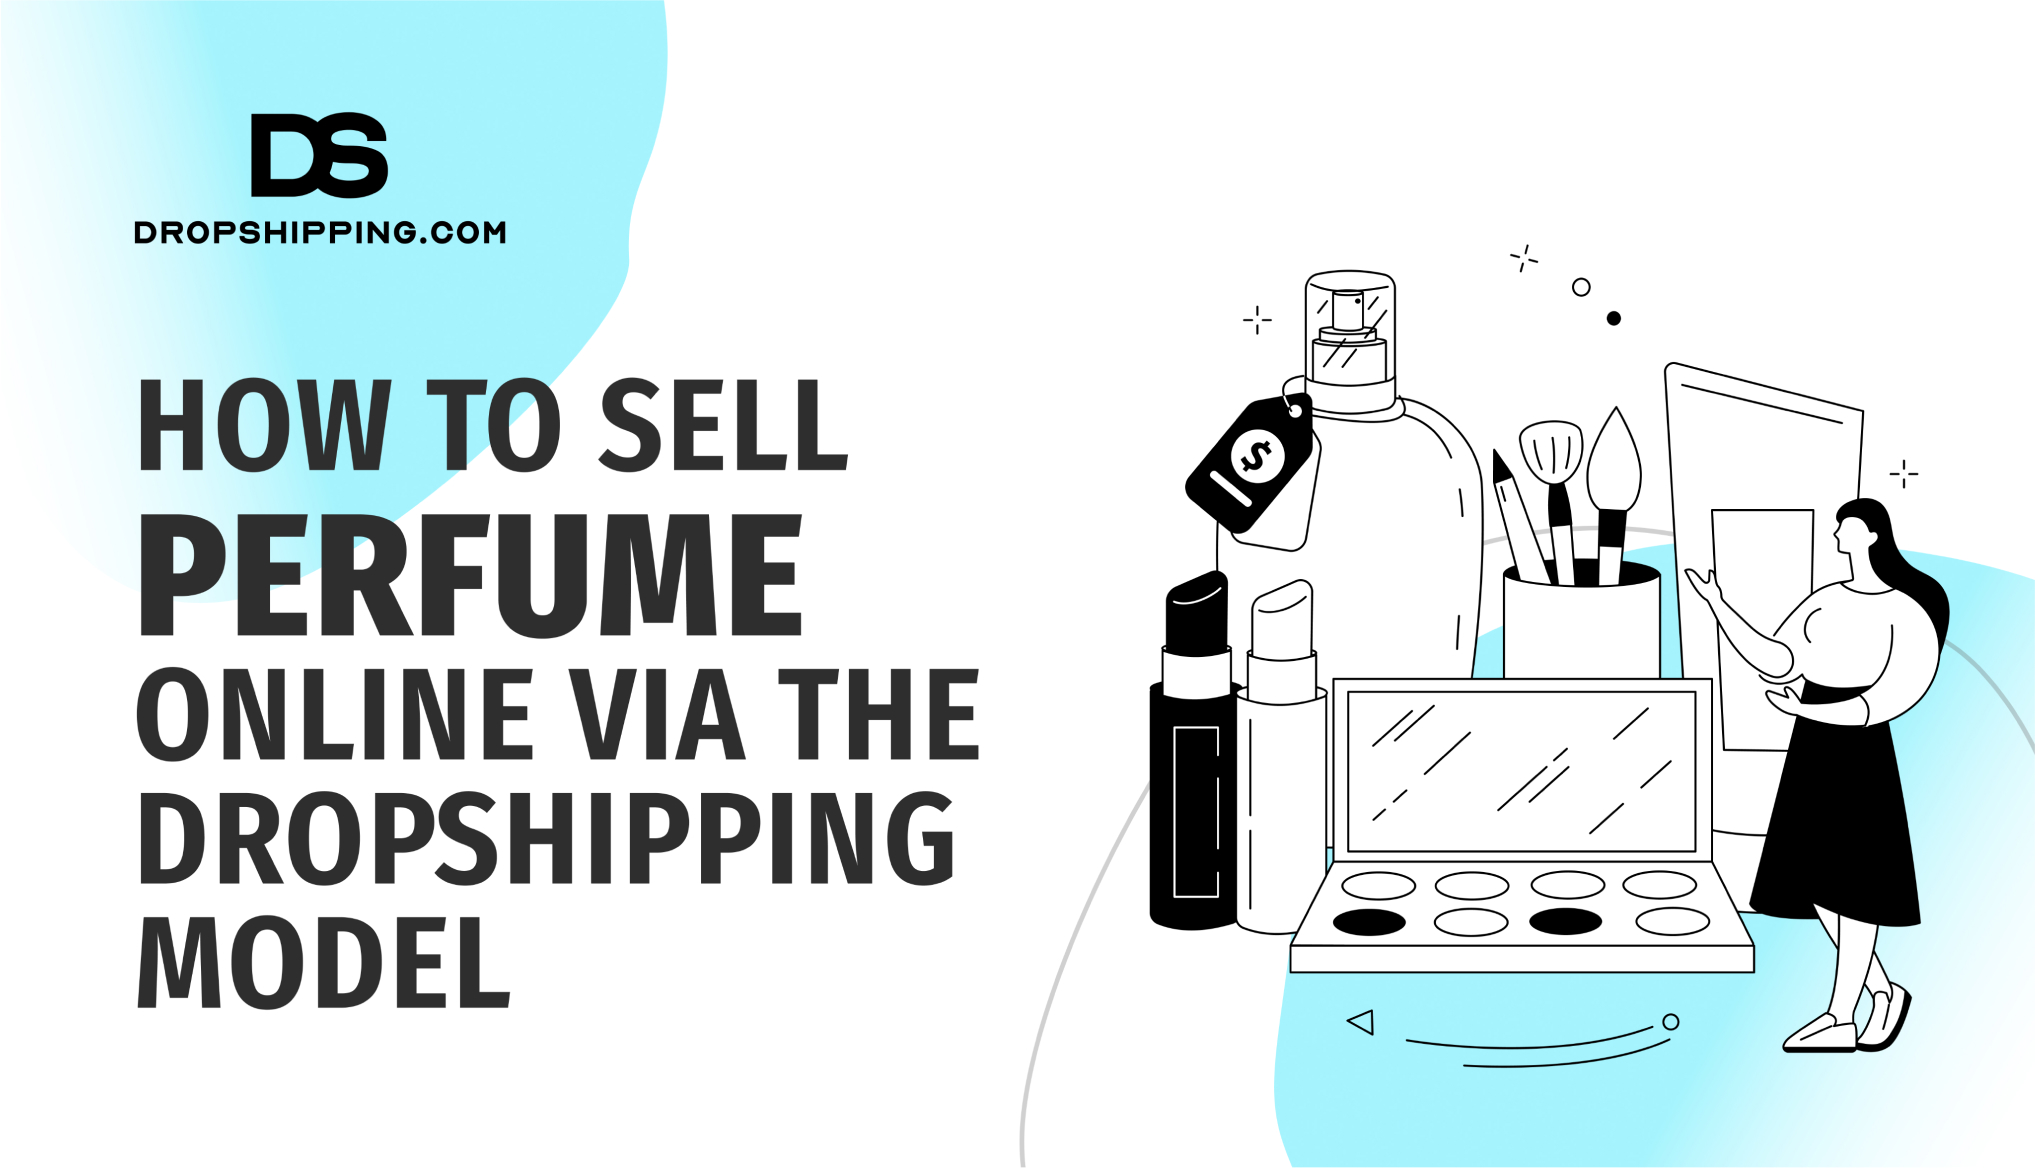 How to Sell Perfume Online via the Dropshipping Model